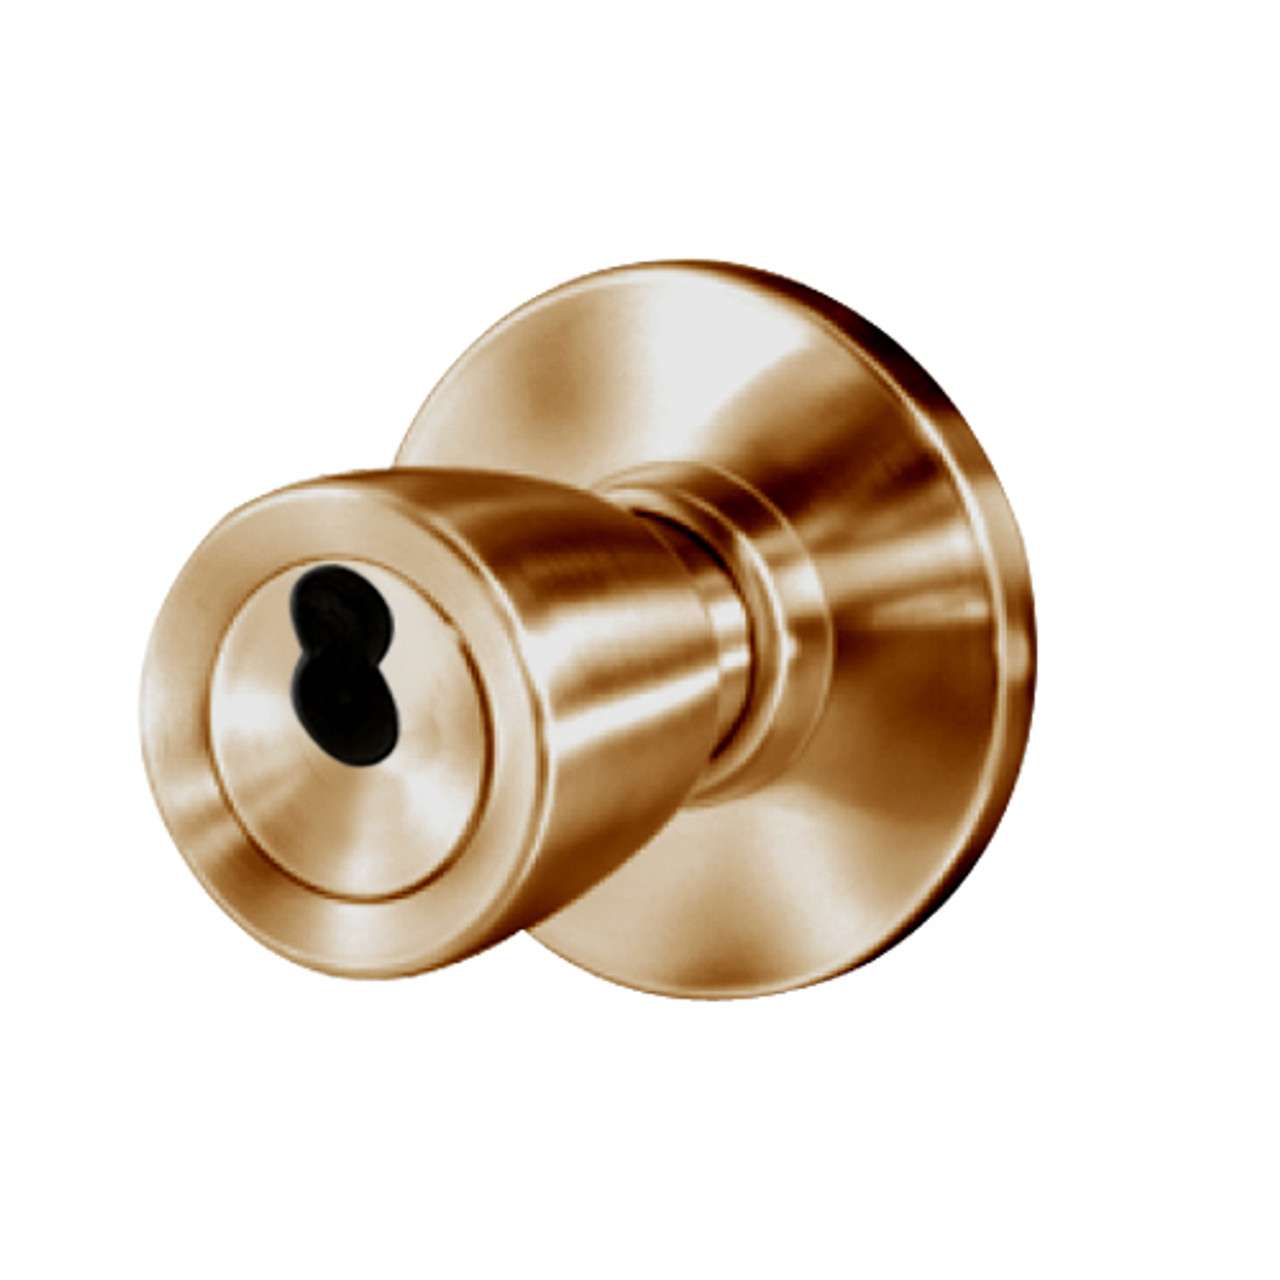 8K57YD6AS3612 Best 8K Series Exit Heavy Duty Cylindrical Knob Locks with Tulip Style in Satin Bronze